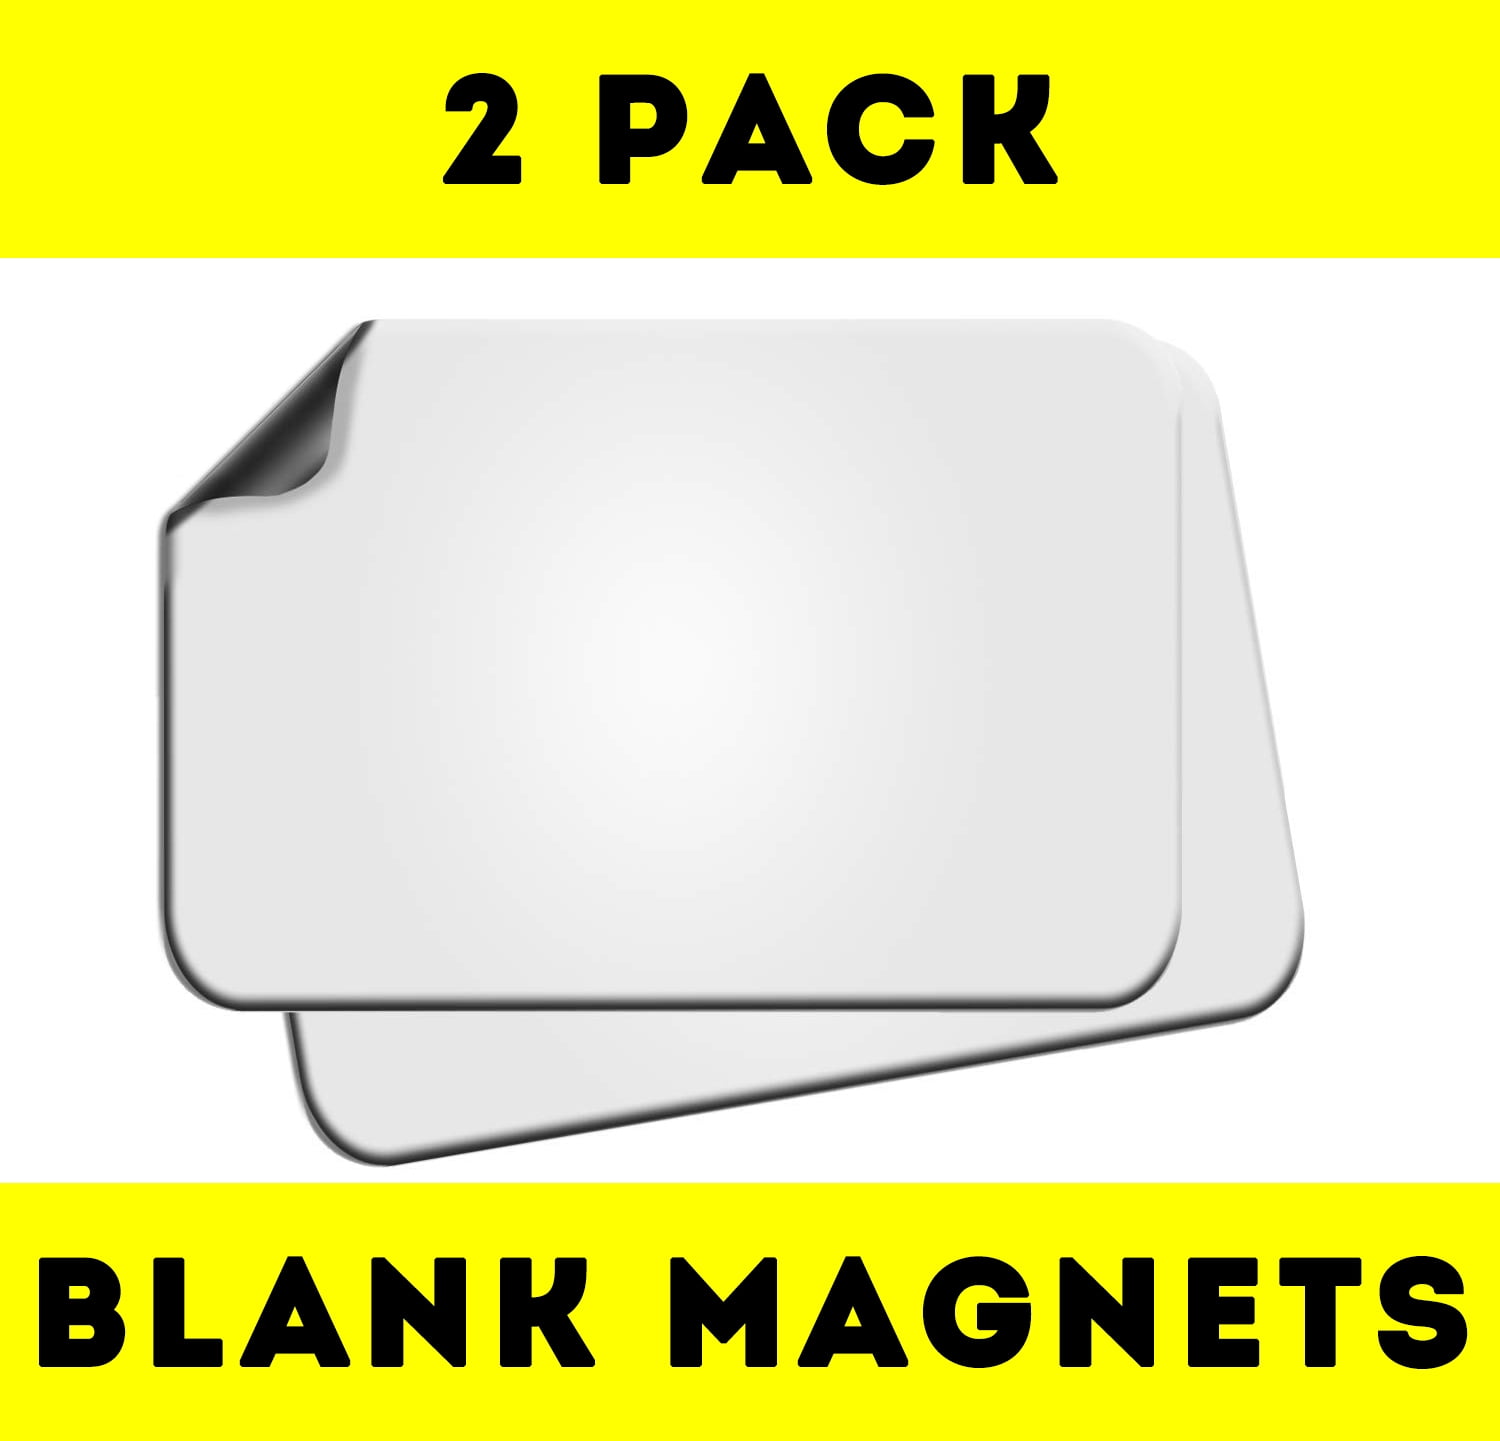 Blank Magnets for Sale